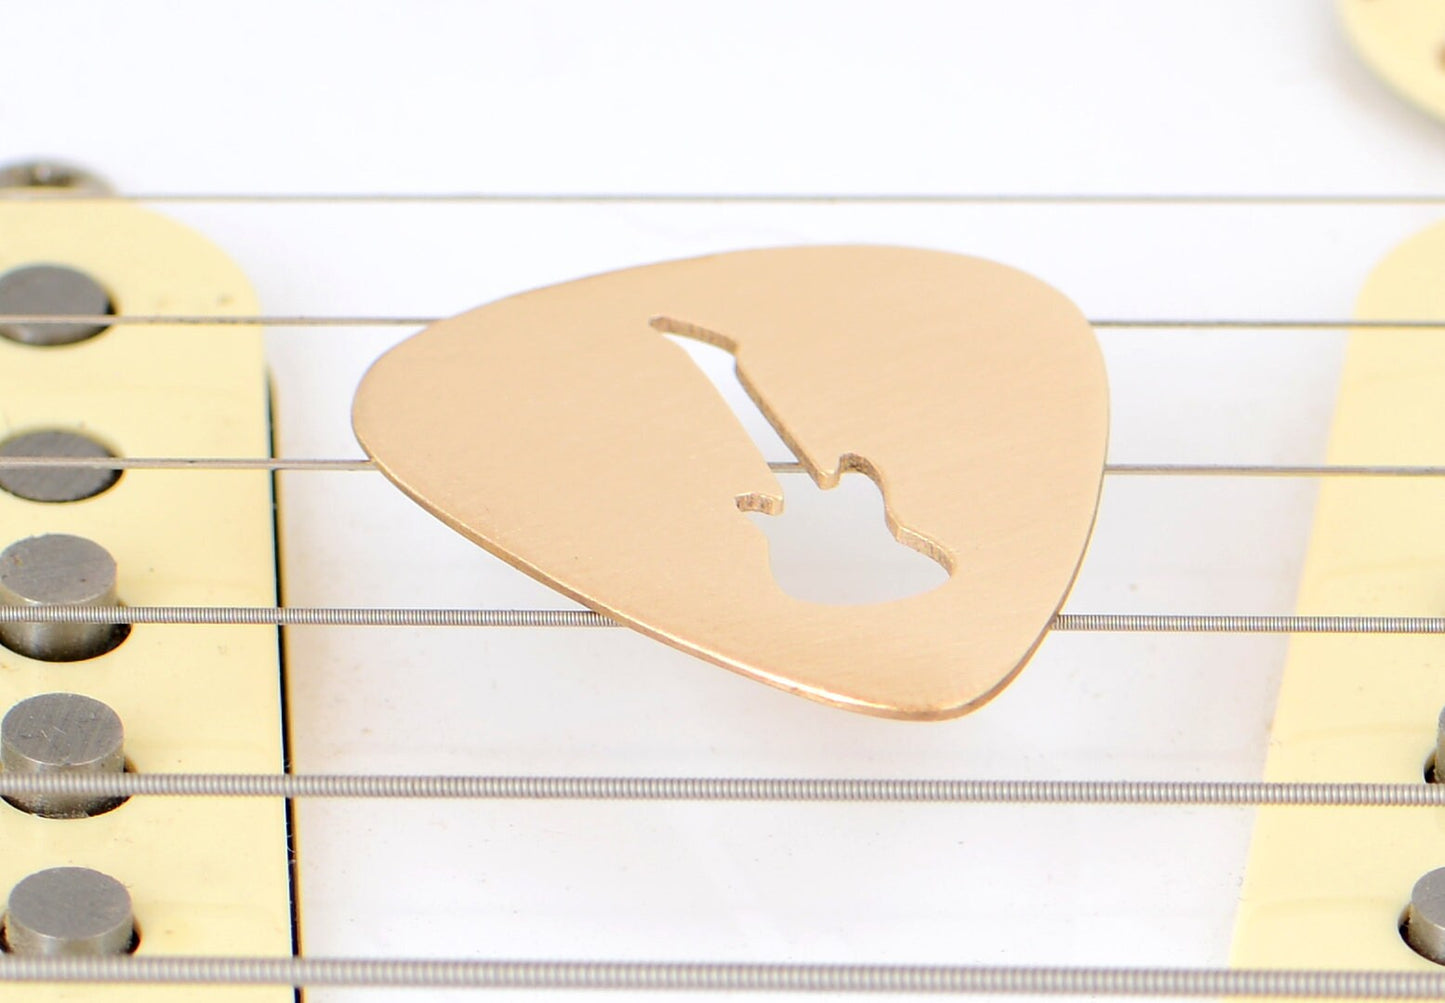 Bronze guitar pick with electric guitar cut out